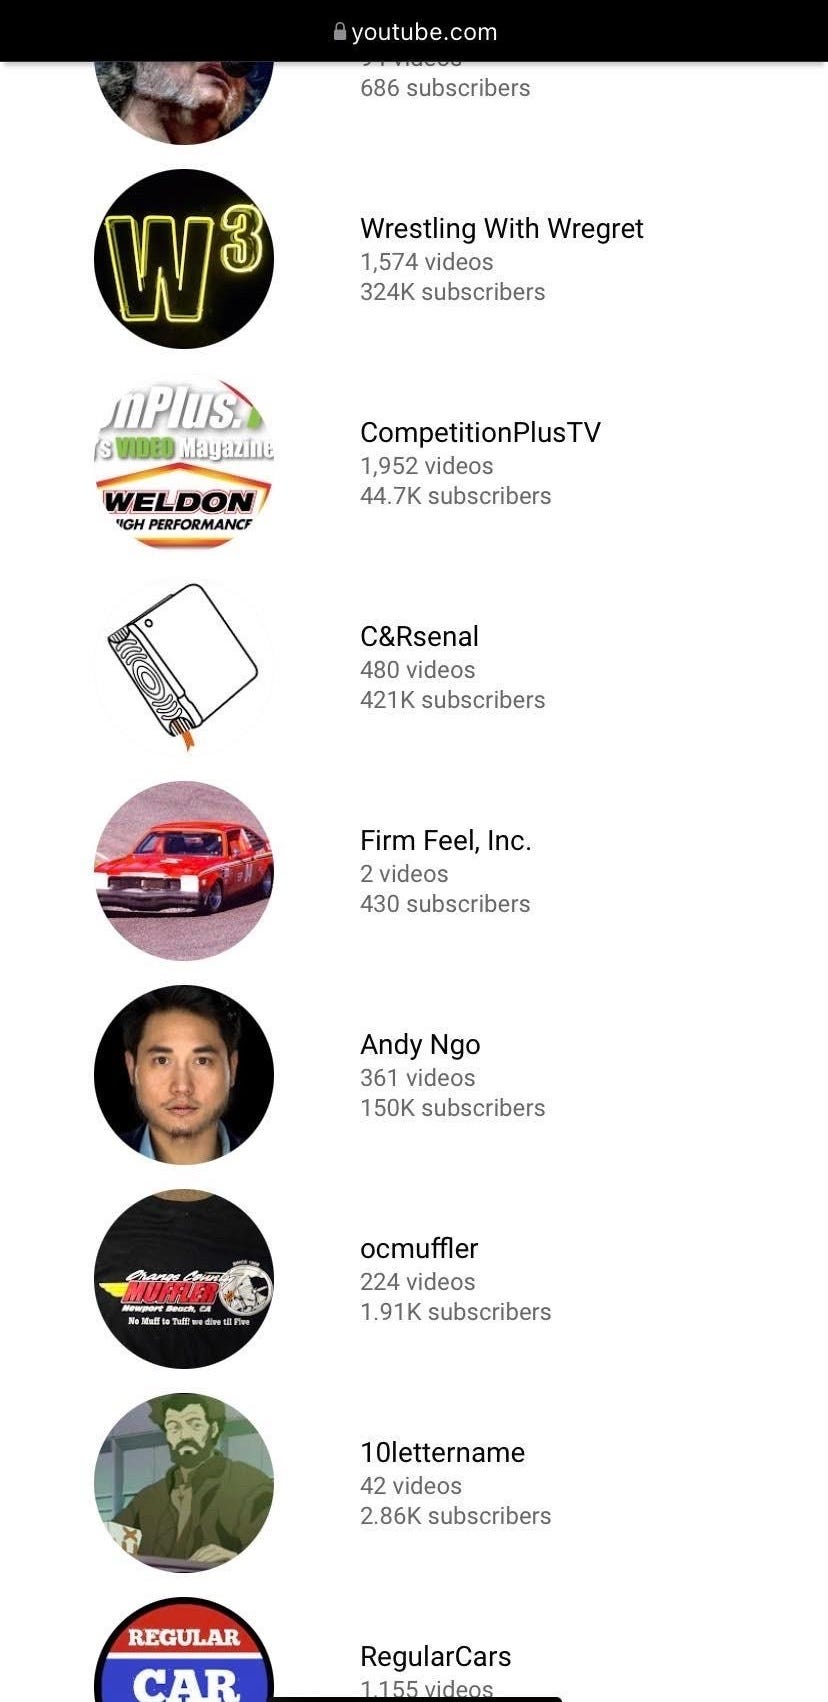 Image of Ben Smith's you tube subscriptions which include Andy Ngo, wrestling with wregret,,Wrigley,, plus TV, C&R senal, Firm Feel, Inc, ocmuffler.